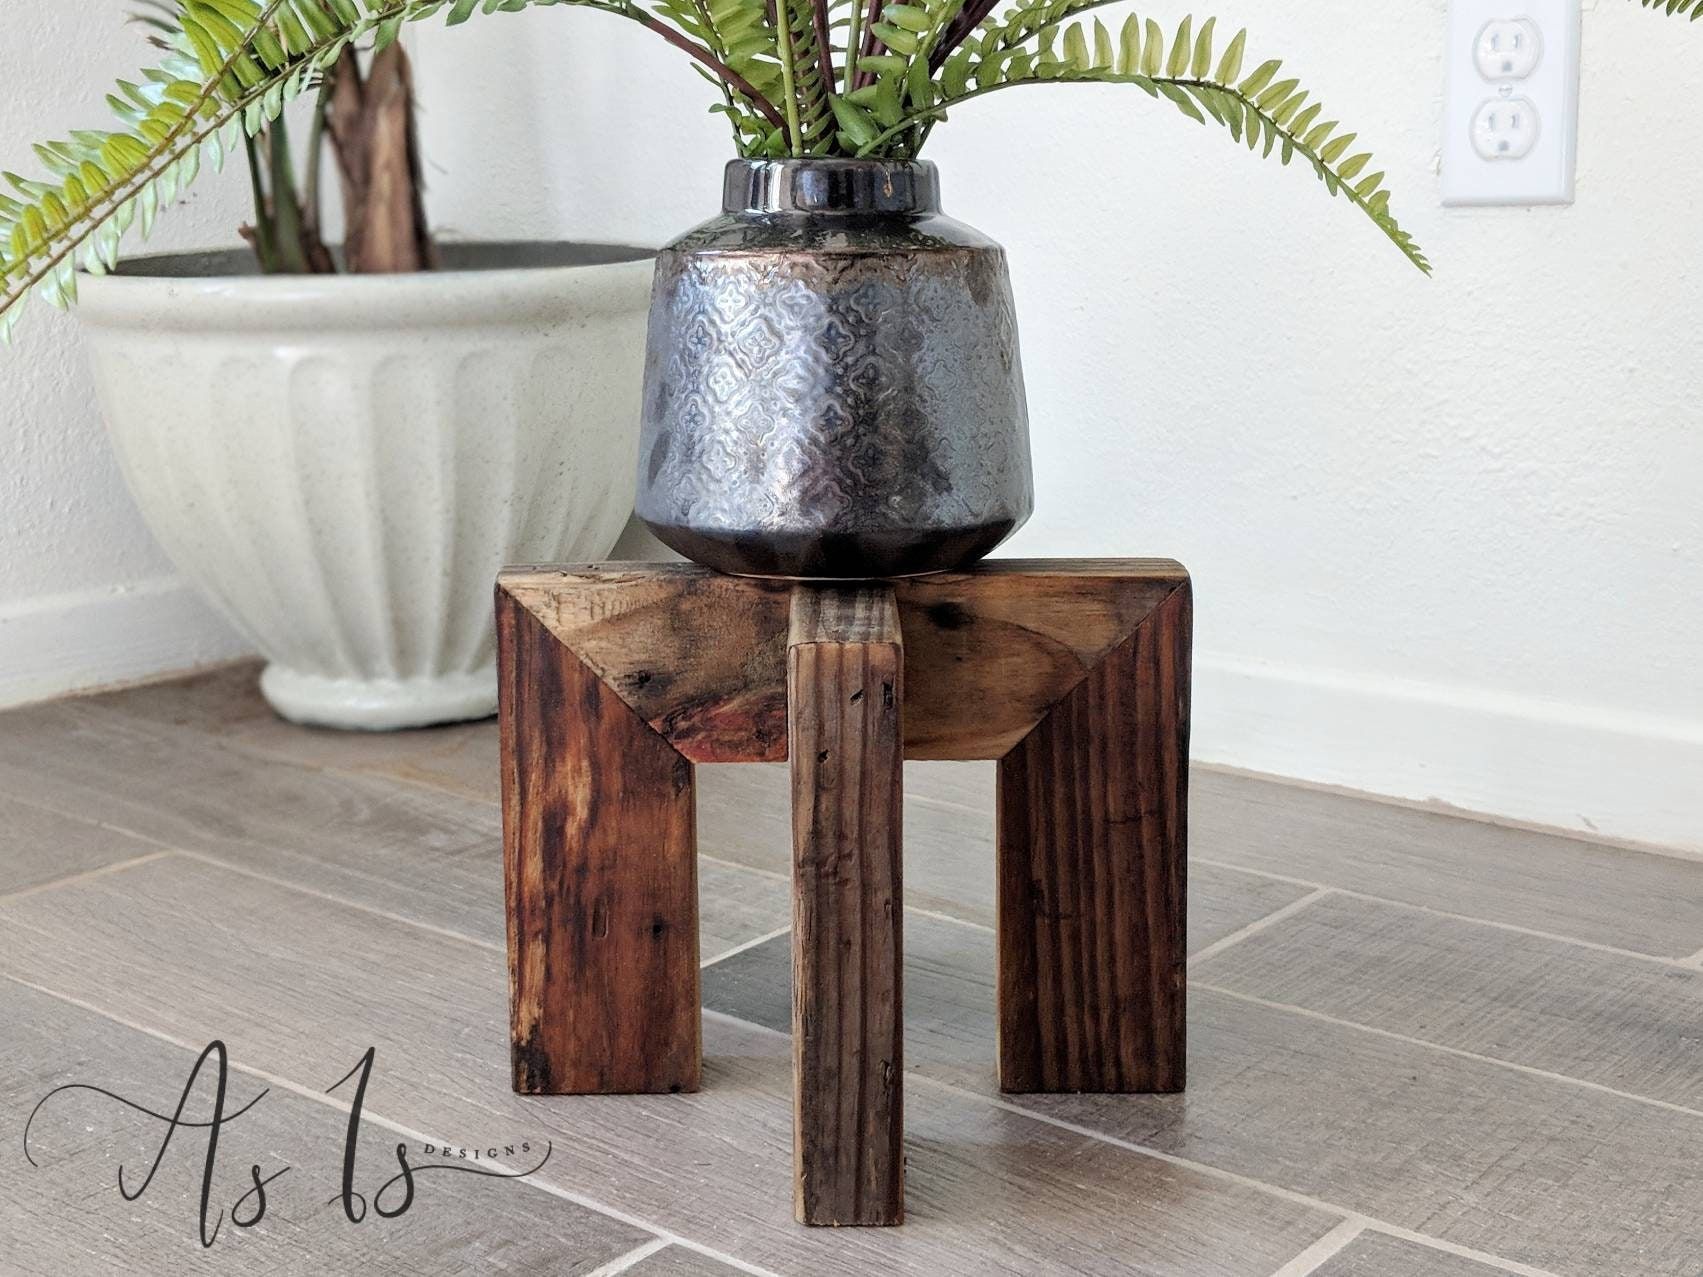 Wood Plant Stand Pot Holder Table Indoor Bohemian Decor – Etsy In Wooden Plant Stands (View 11 of 15)